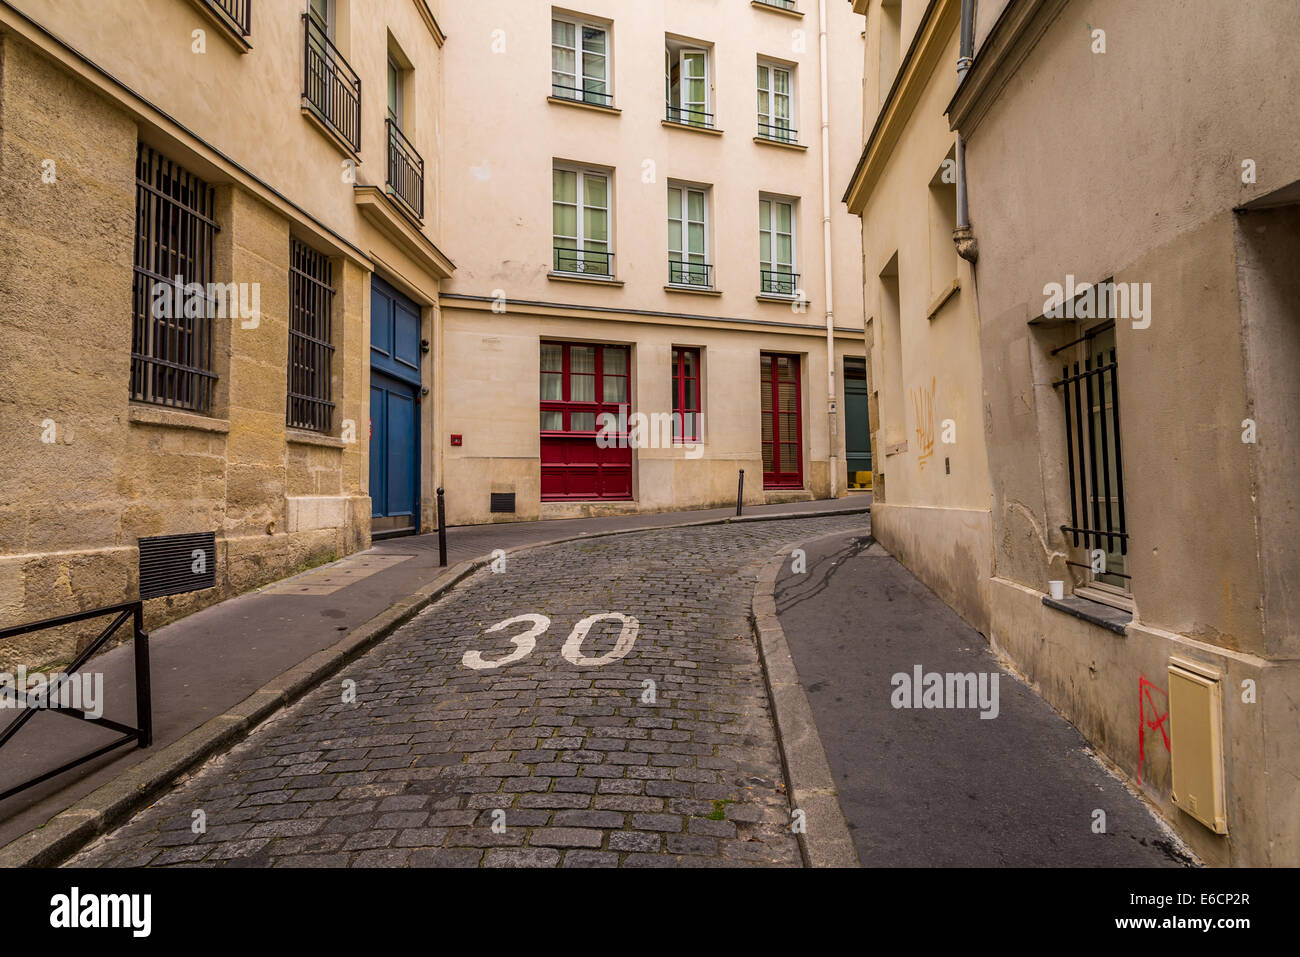 A deserted cobble stone street in Paris France. Stock Photo